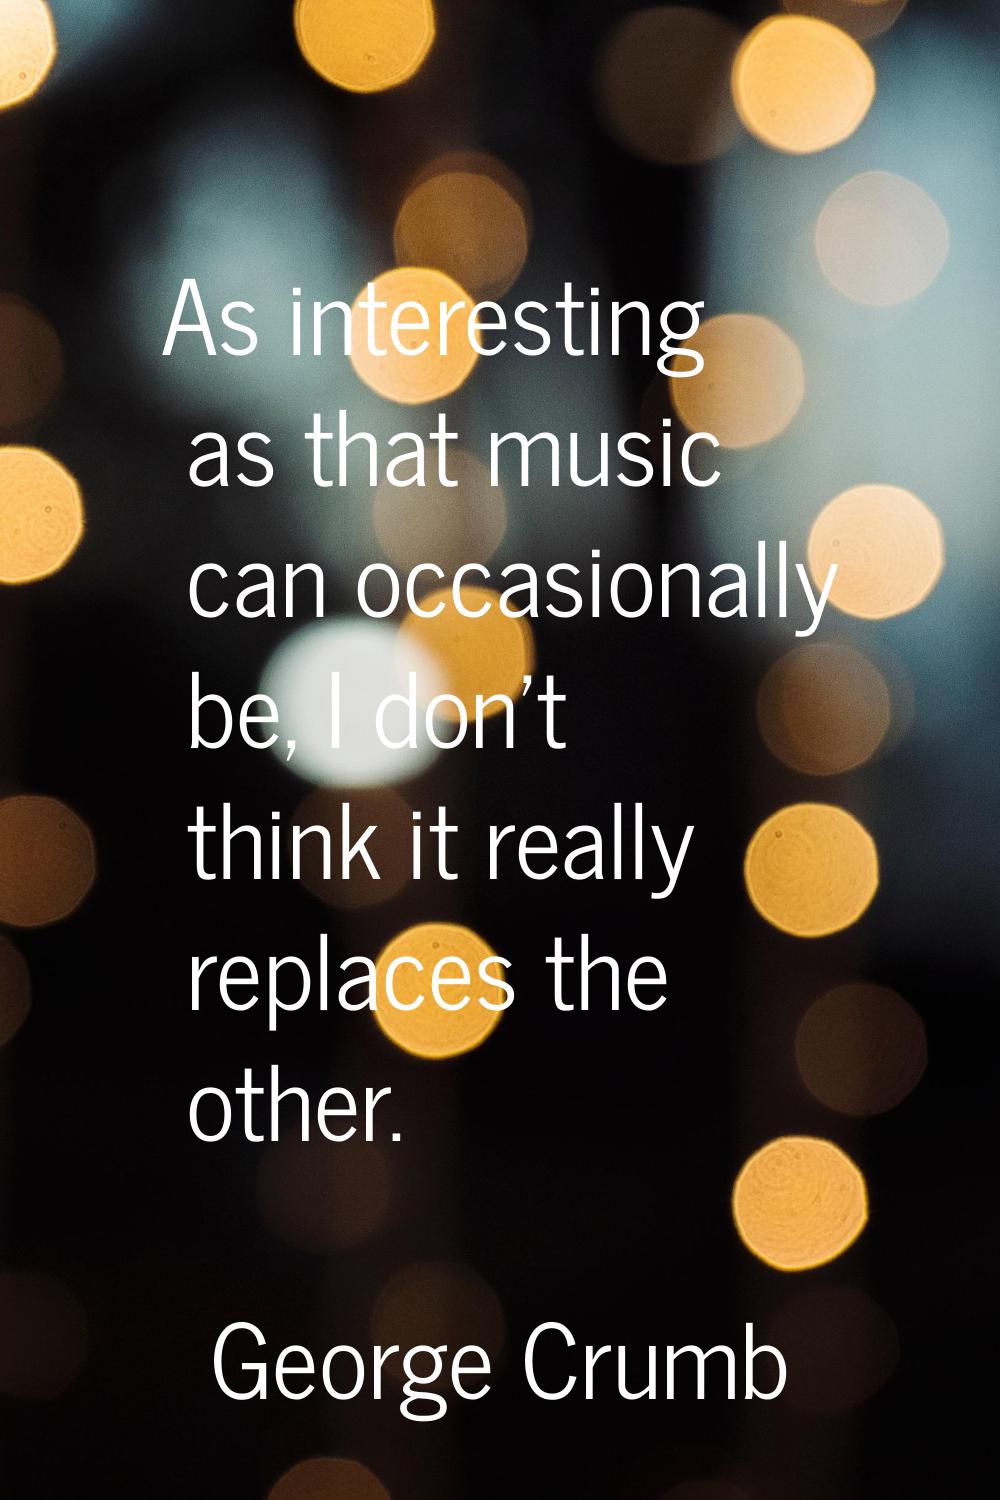 As interesting as that music can occasionally be, I don't think it really replaces the other.